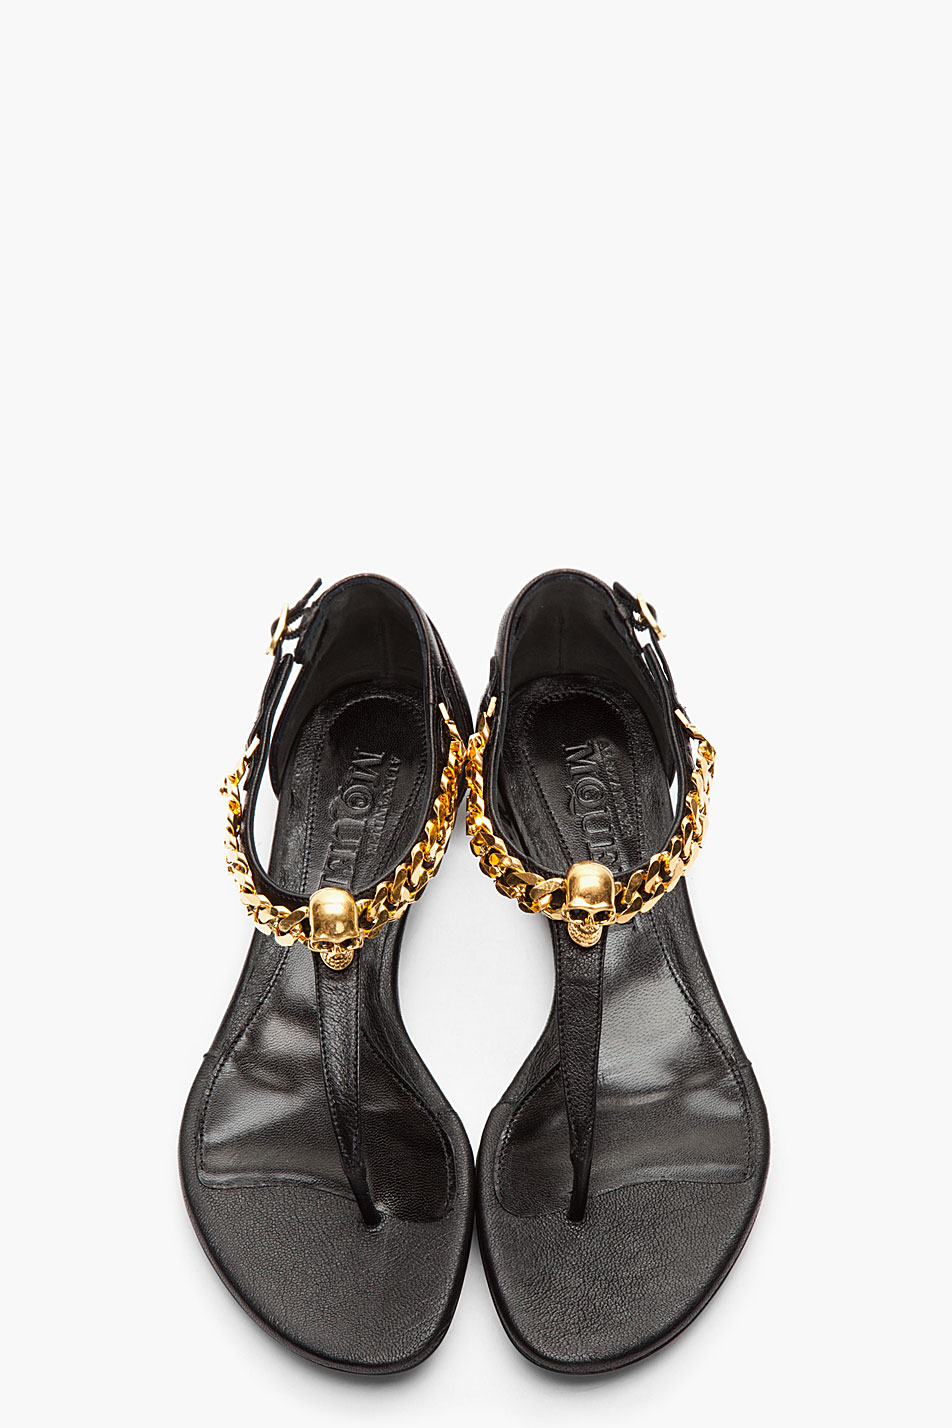 Alexander McQueen Leather Chain and Skull Sandals in Black | Lyst